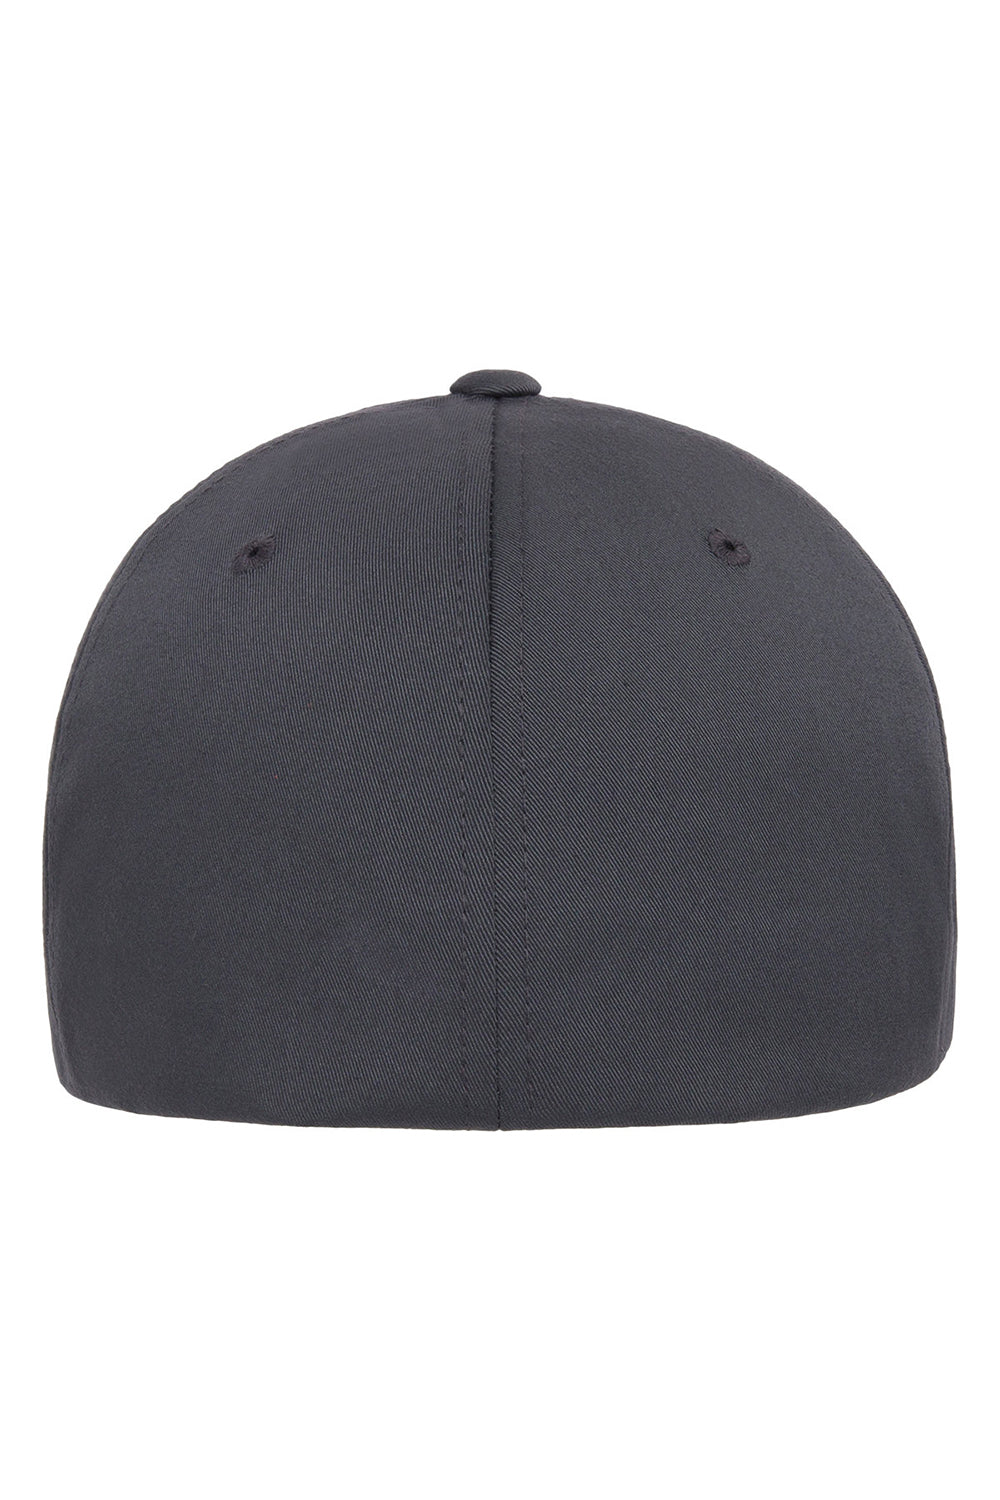 Yupoong 6277R Mens Recycled Hat Light Charcoal Grey Back